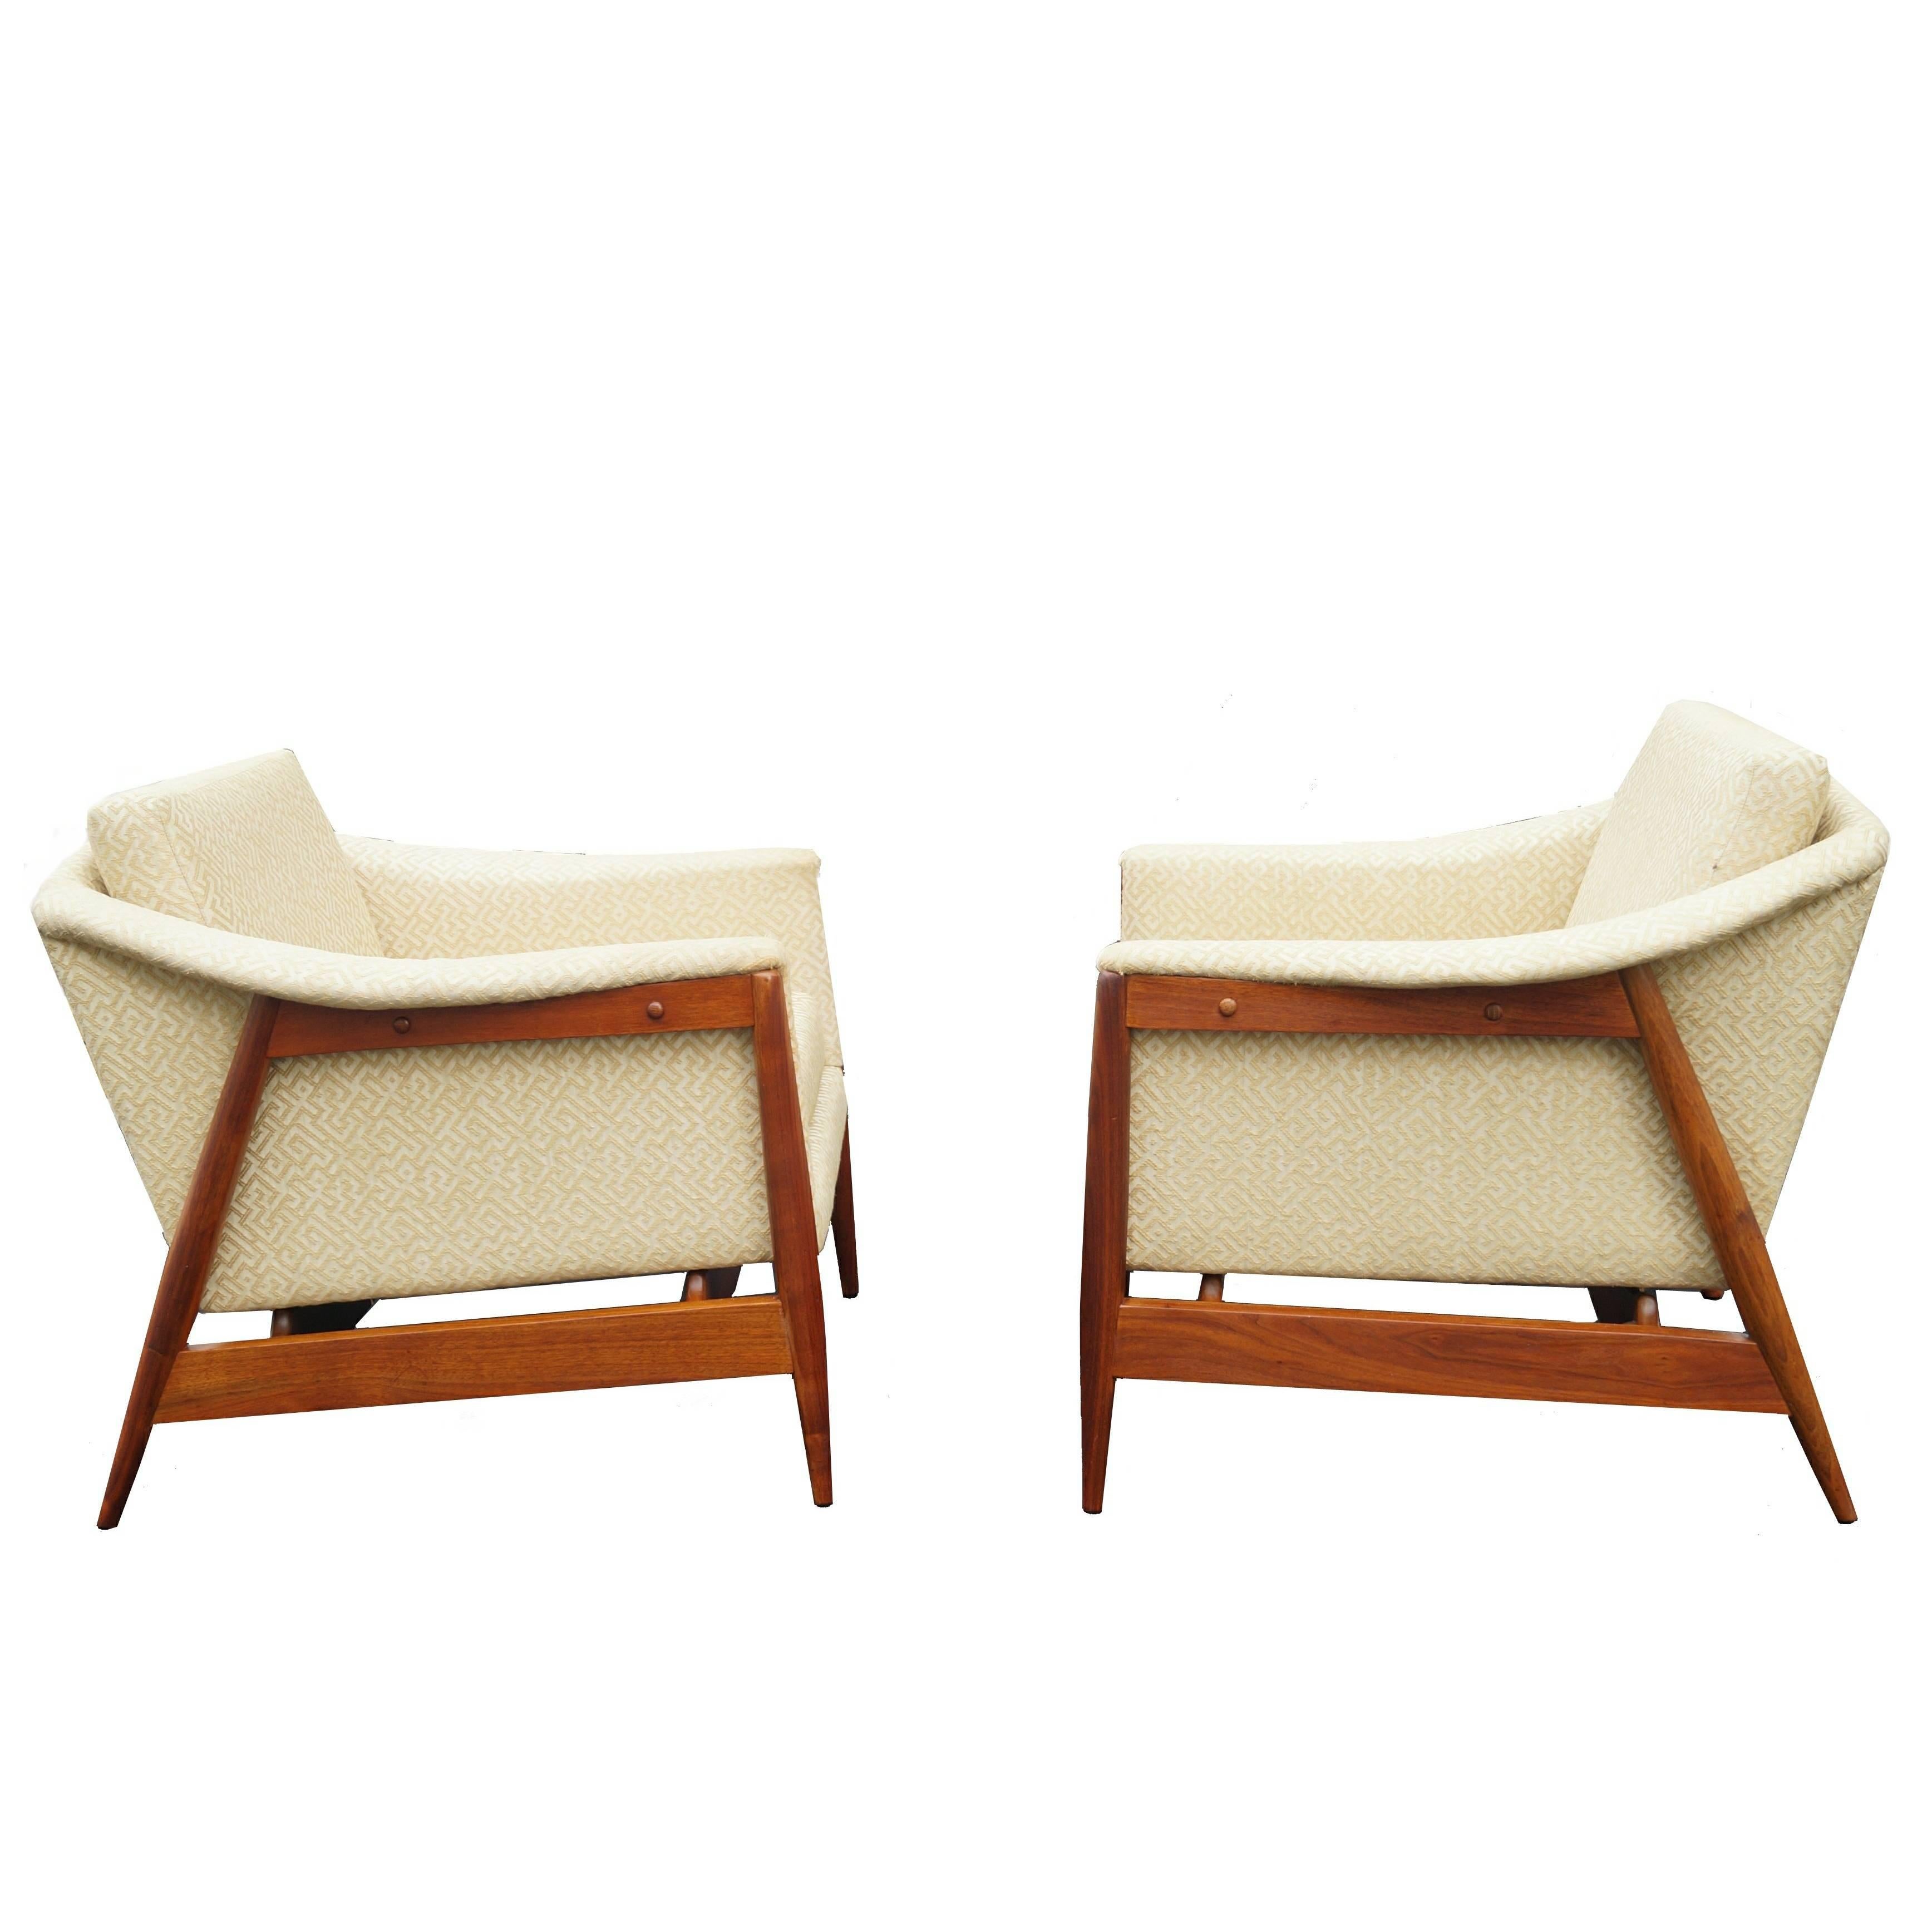 Pair of 1950s DUX Style Danish Mid-Century Modern Lounge Chairs